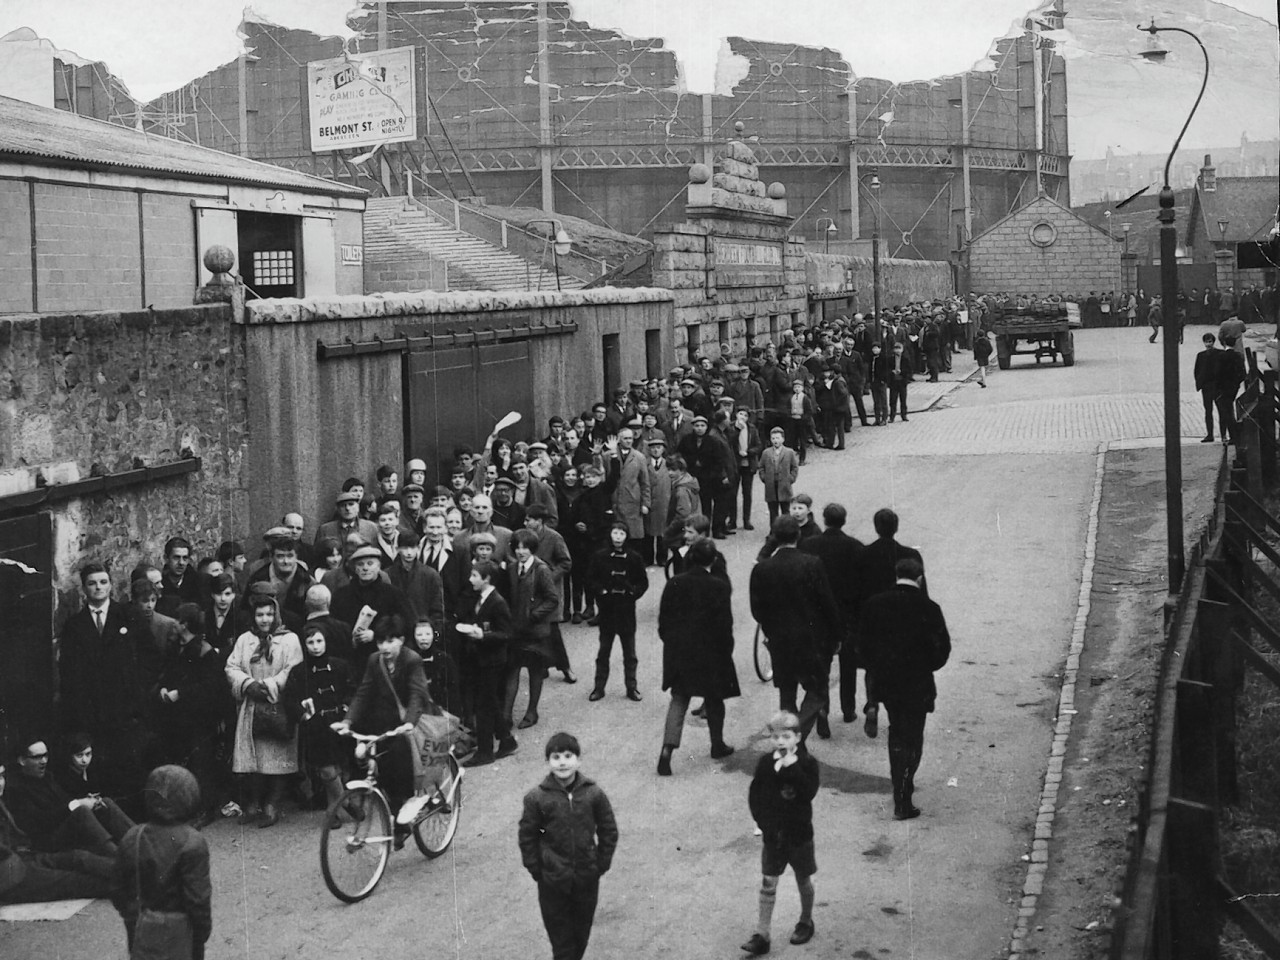 Queues snake round from the ticket office on Pittodrie Street for a cup tie against Hibs in 1967